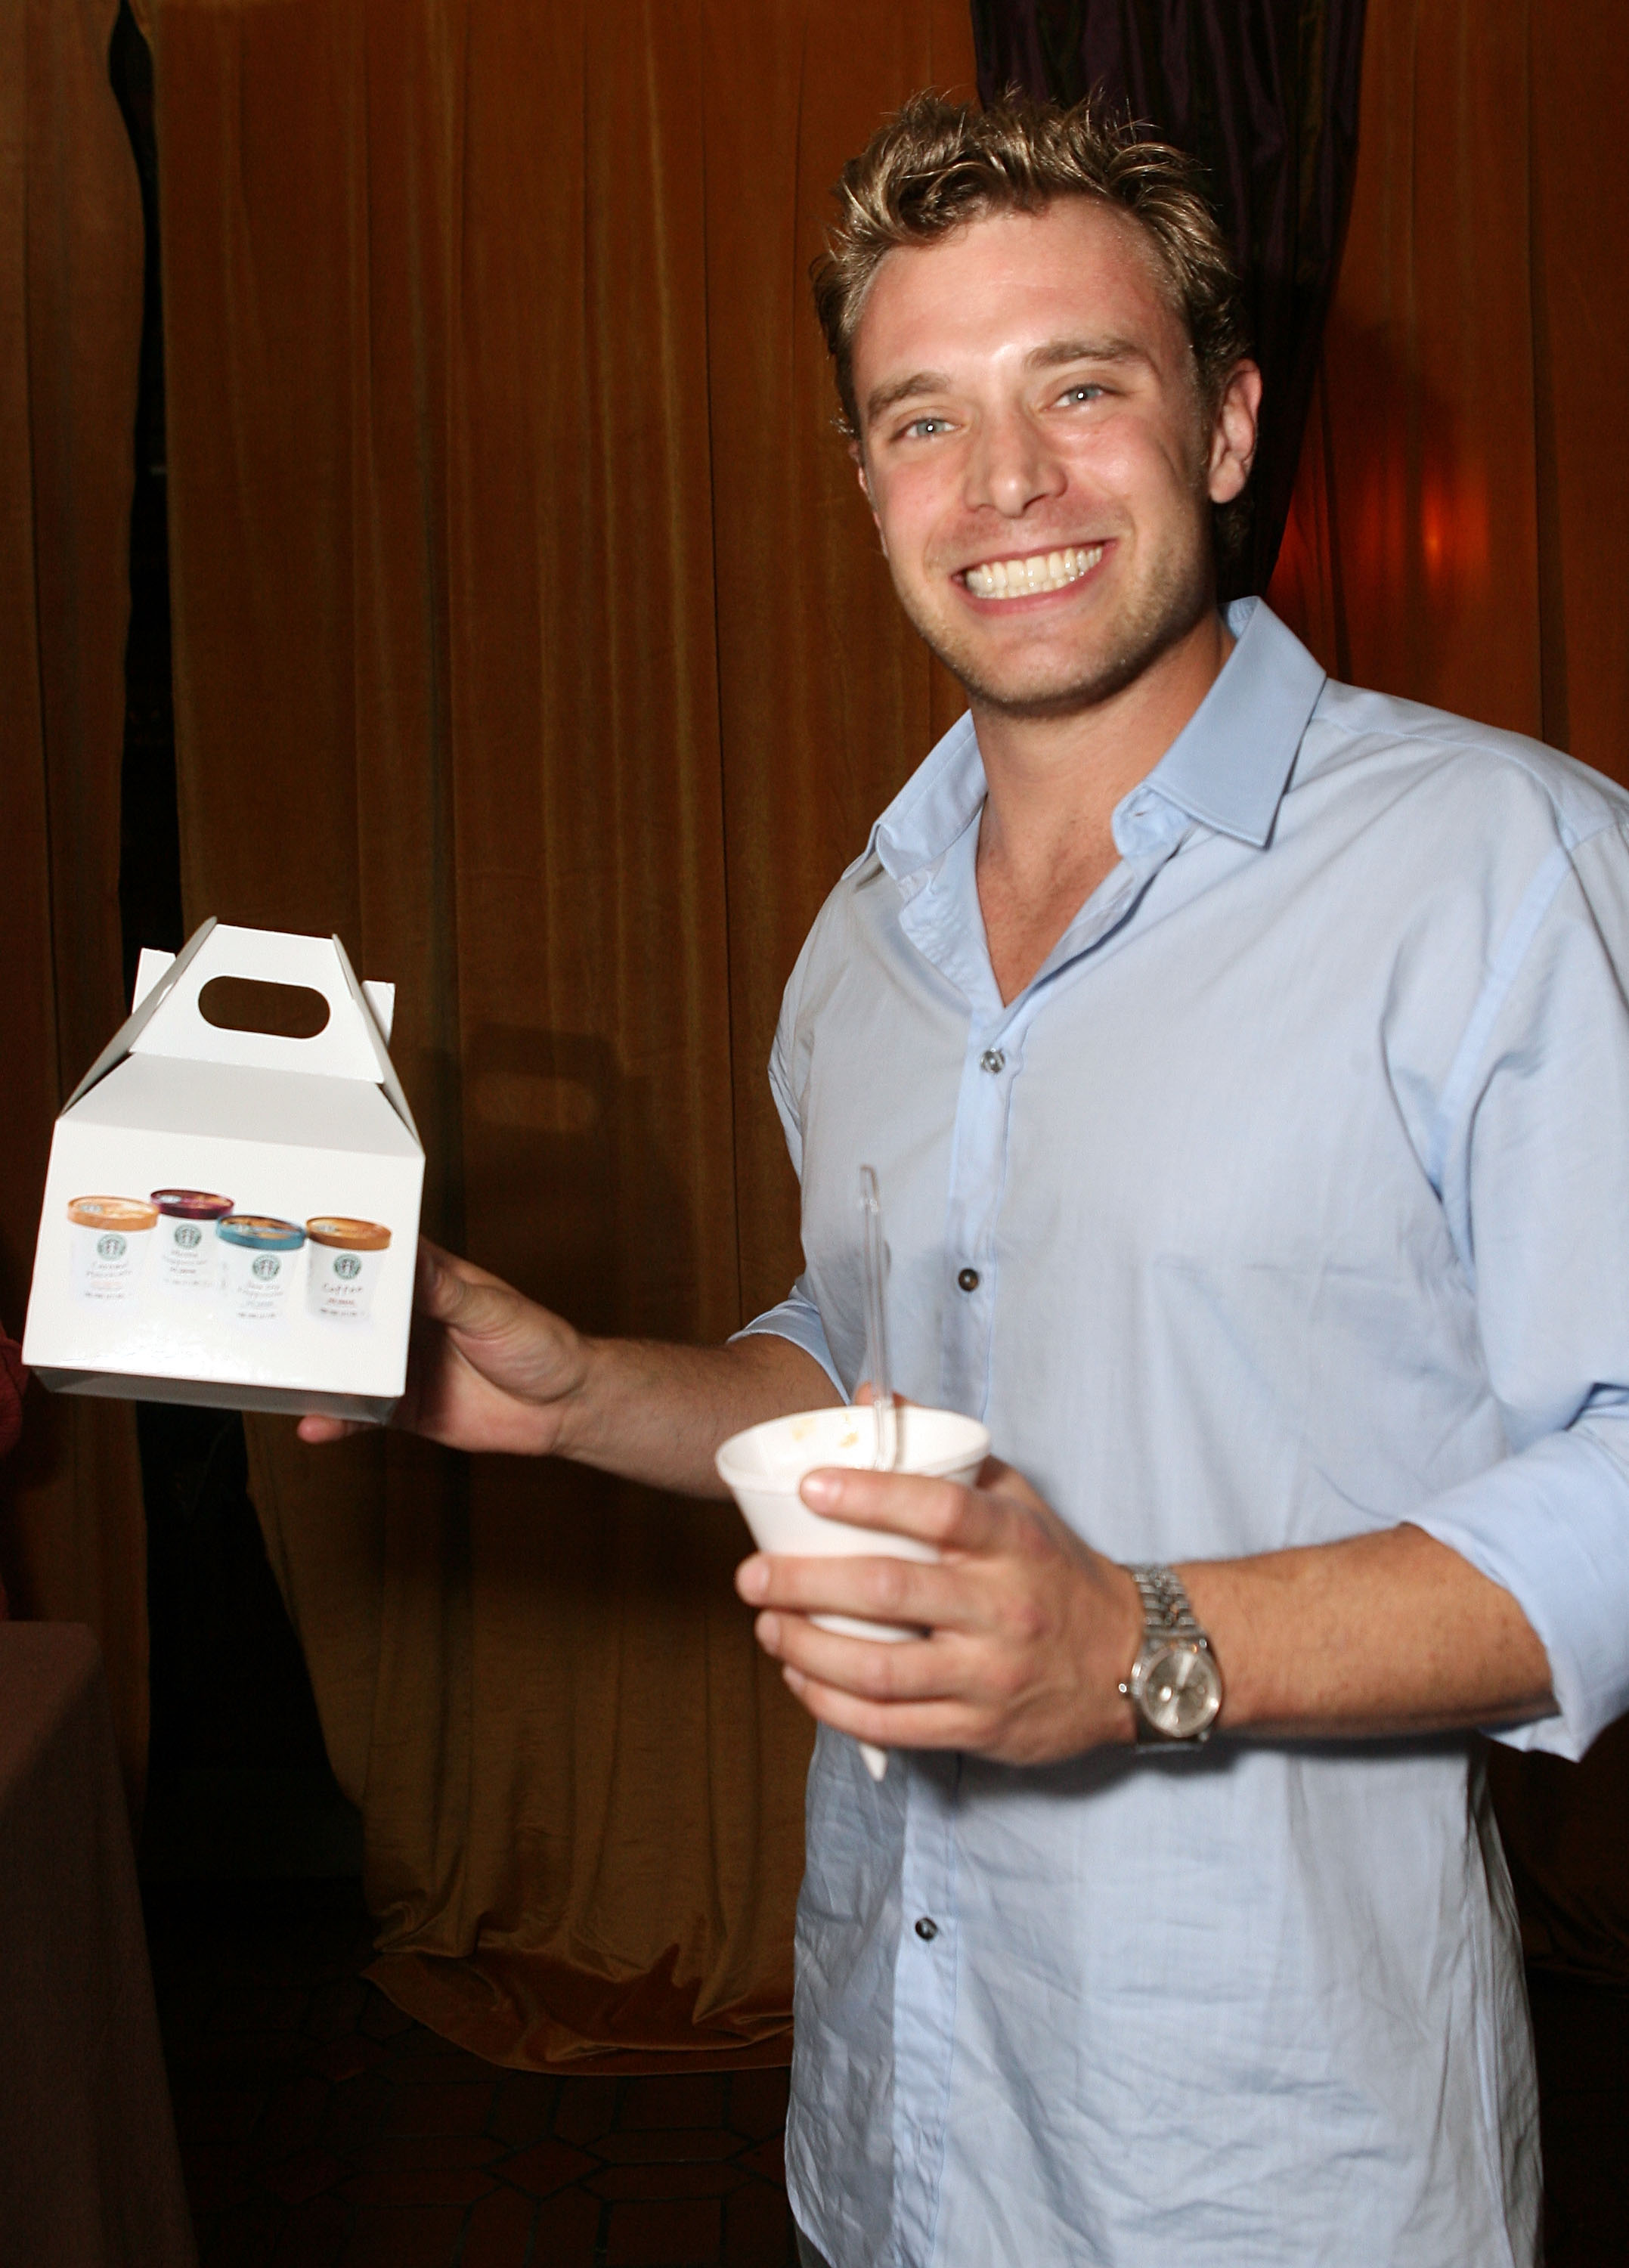 Billy Miller bei den 36th Annual Daytime Emmy Awards in Los Angeles, 2009 | Quelle: Getty Images